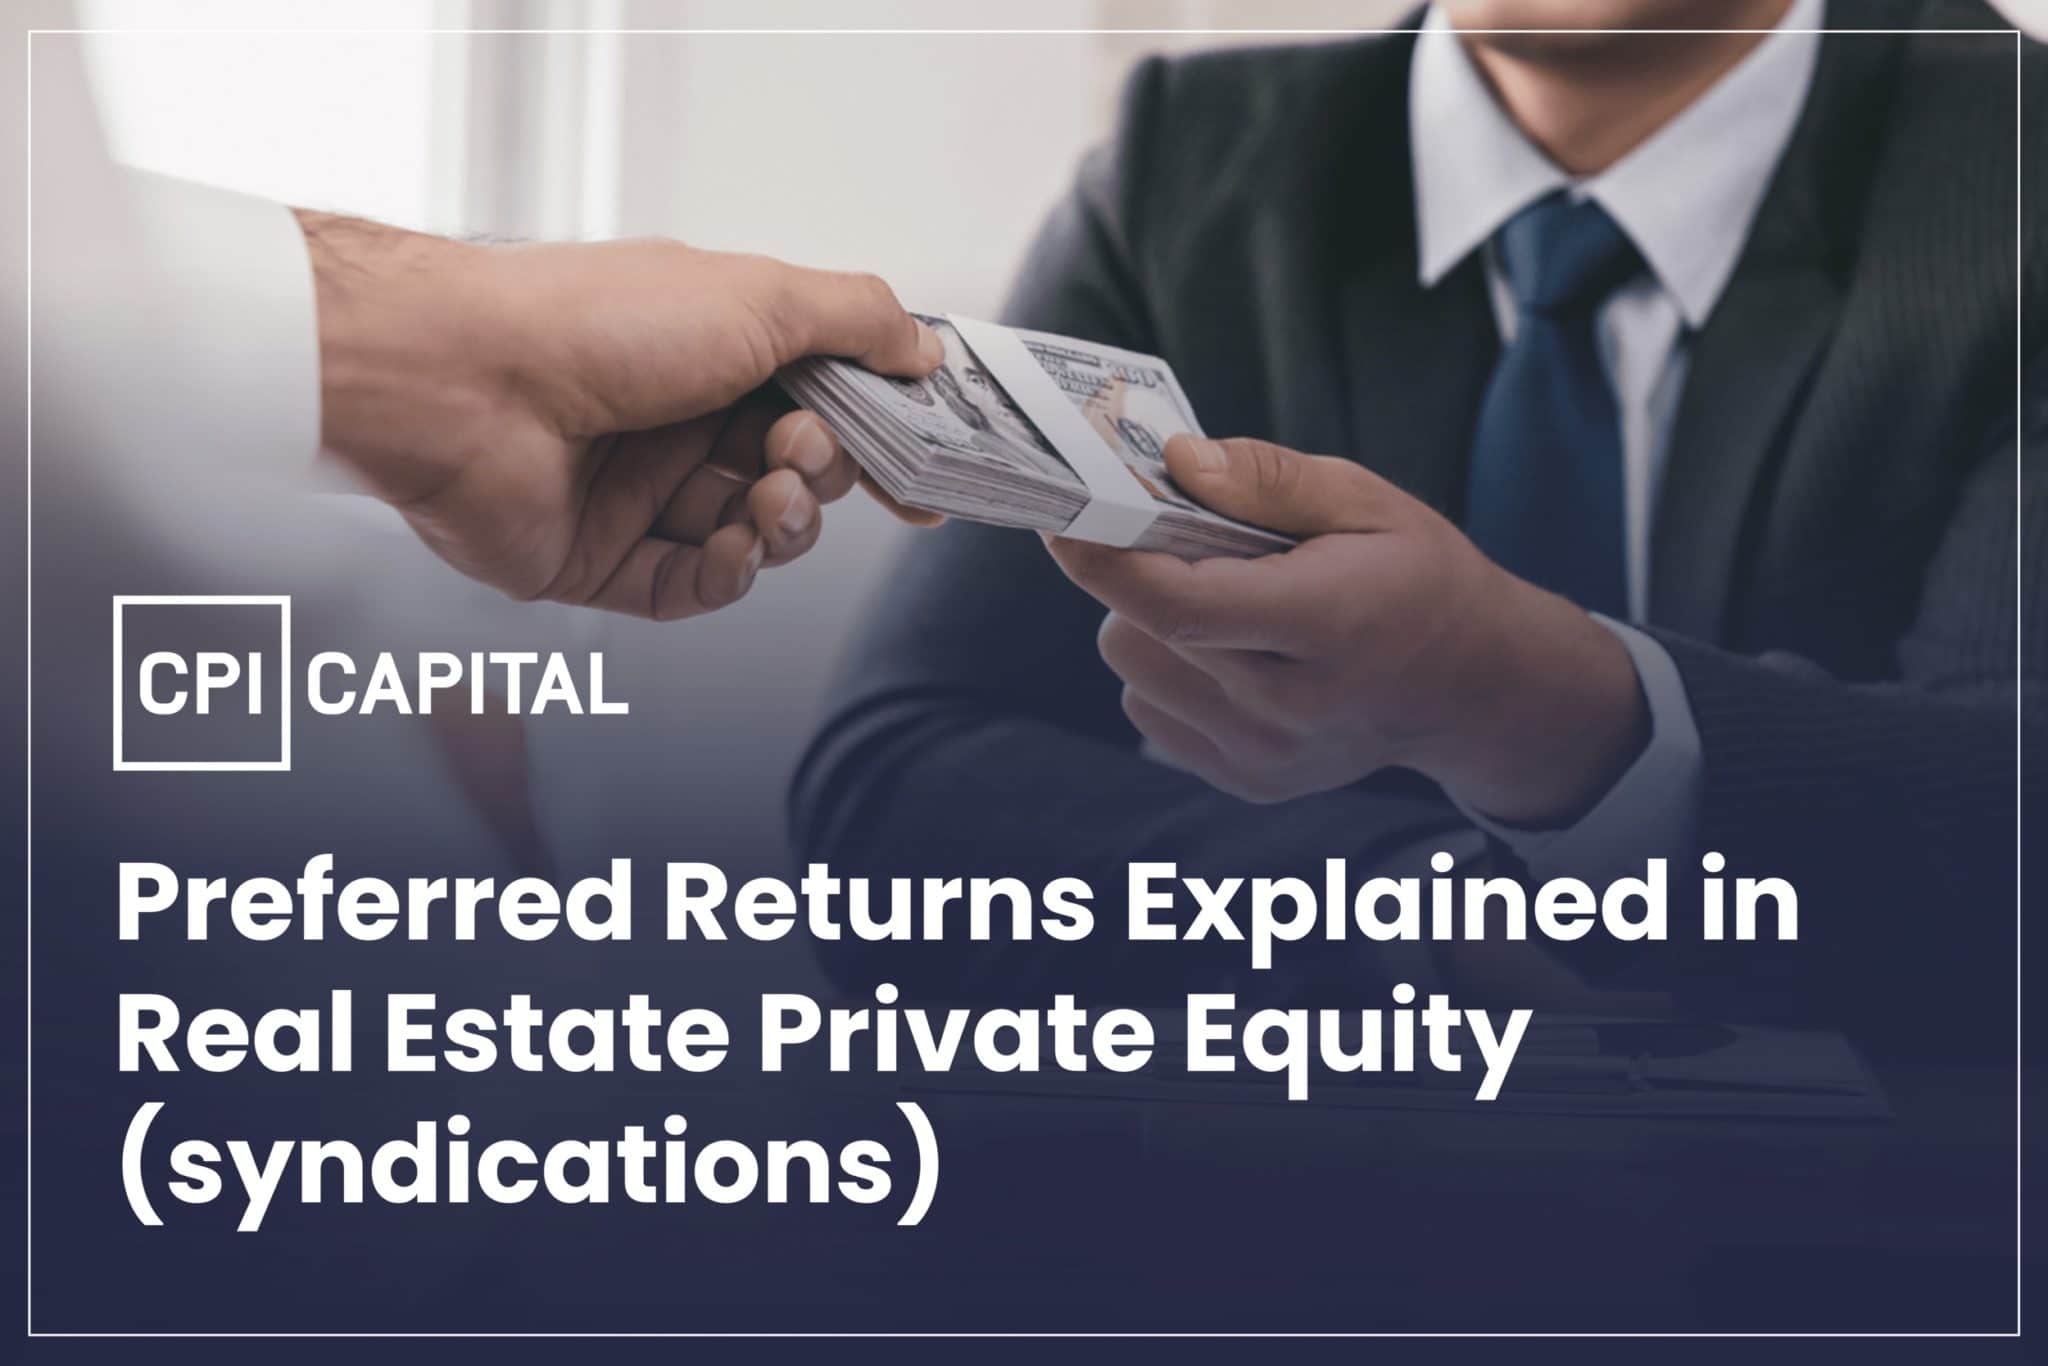 Preferred Returns in Real Estate Private Equity (Syndications) explained